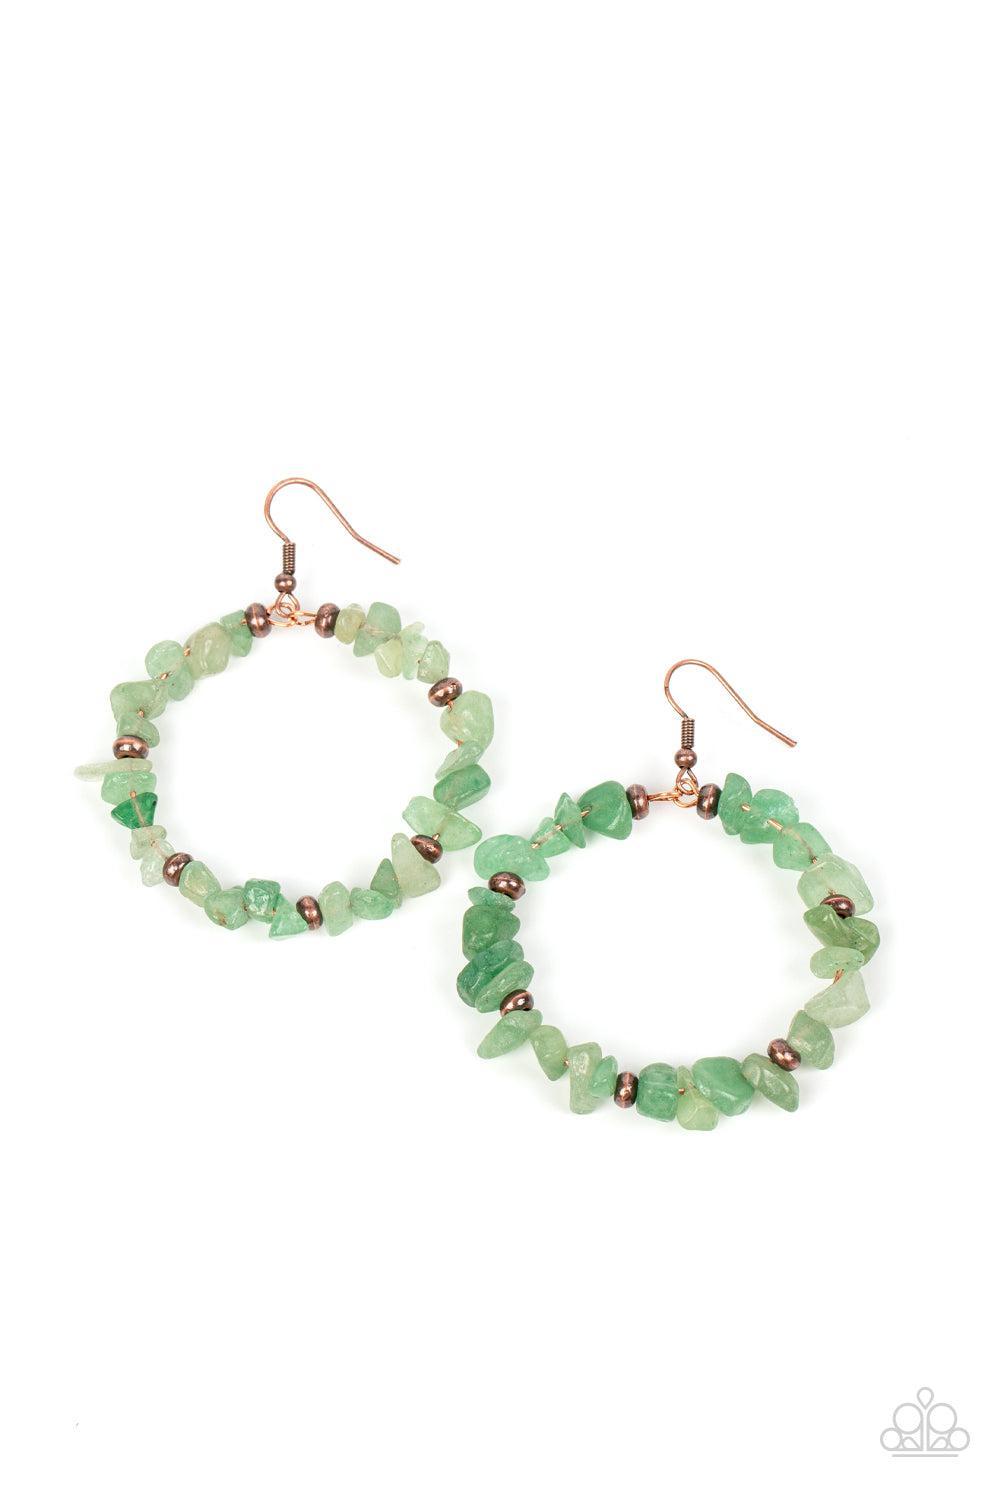 Mineral Mantra Green Jade Stone Earrings - Paparazzi Accessories- lightbox - CarasShop.com - $5 Jewelry by Cara Jewels